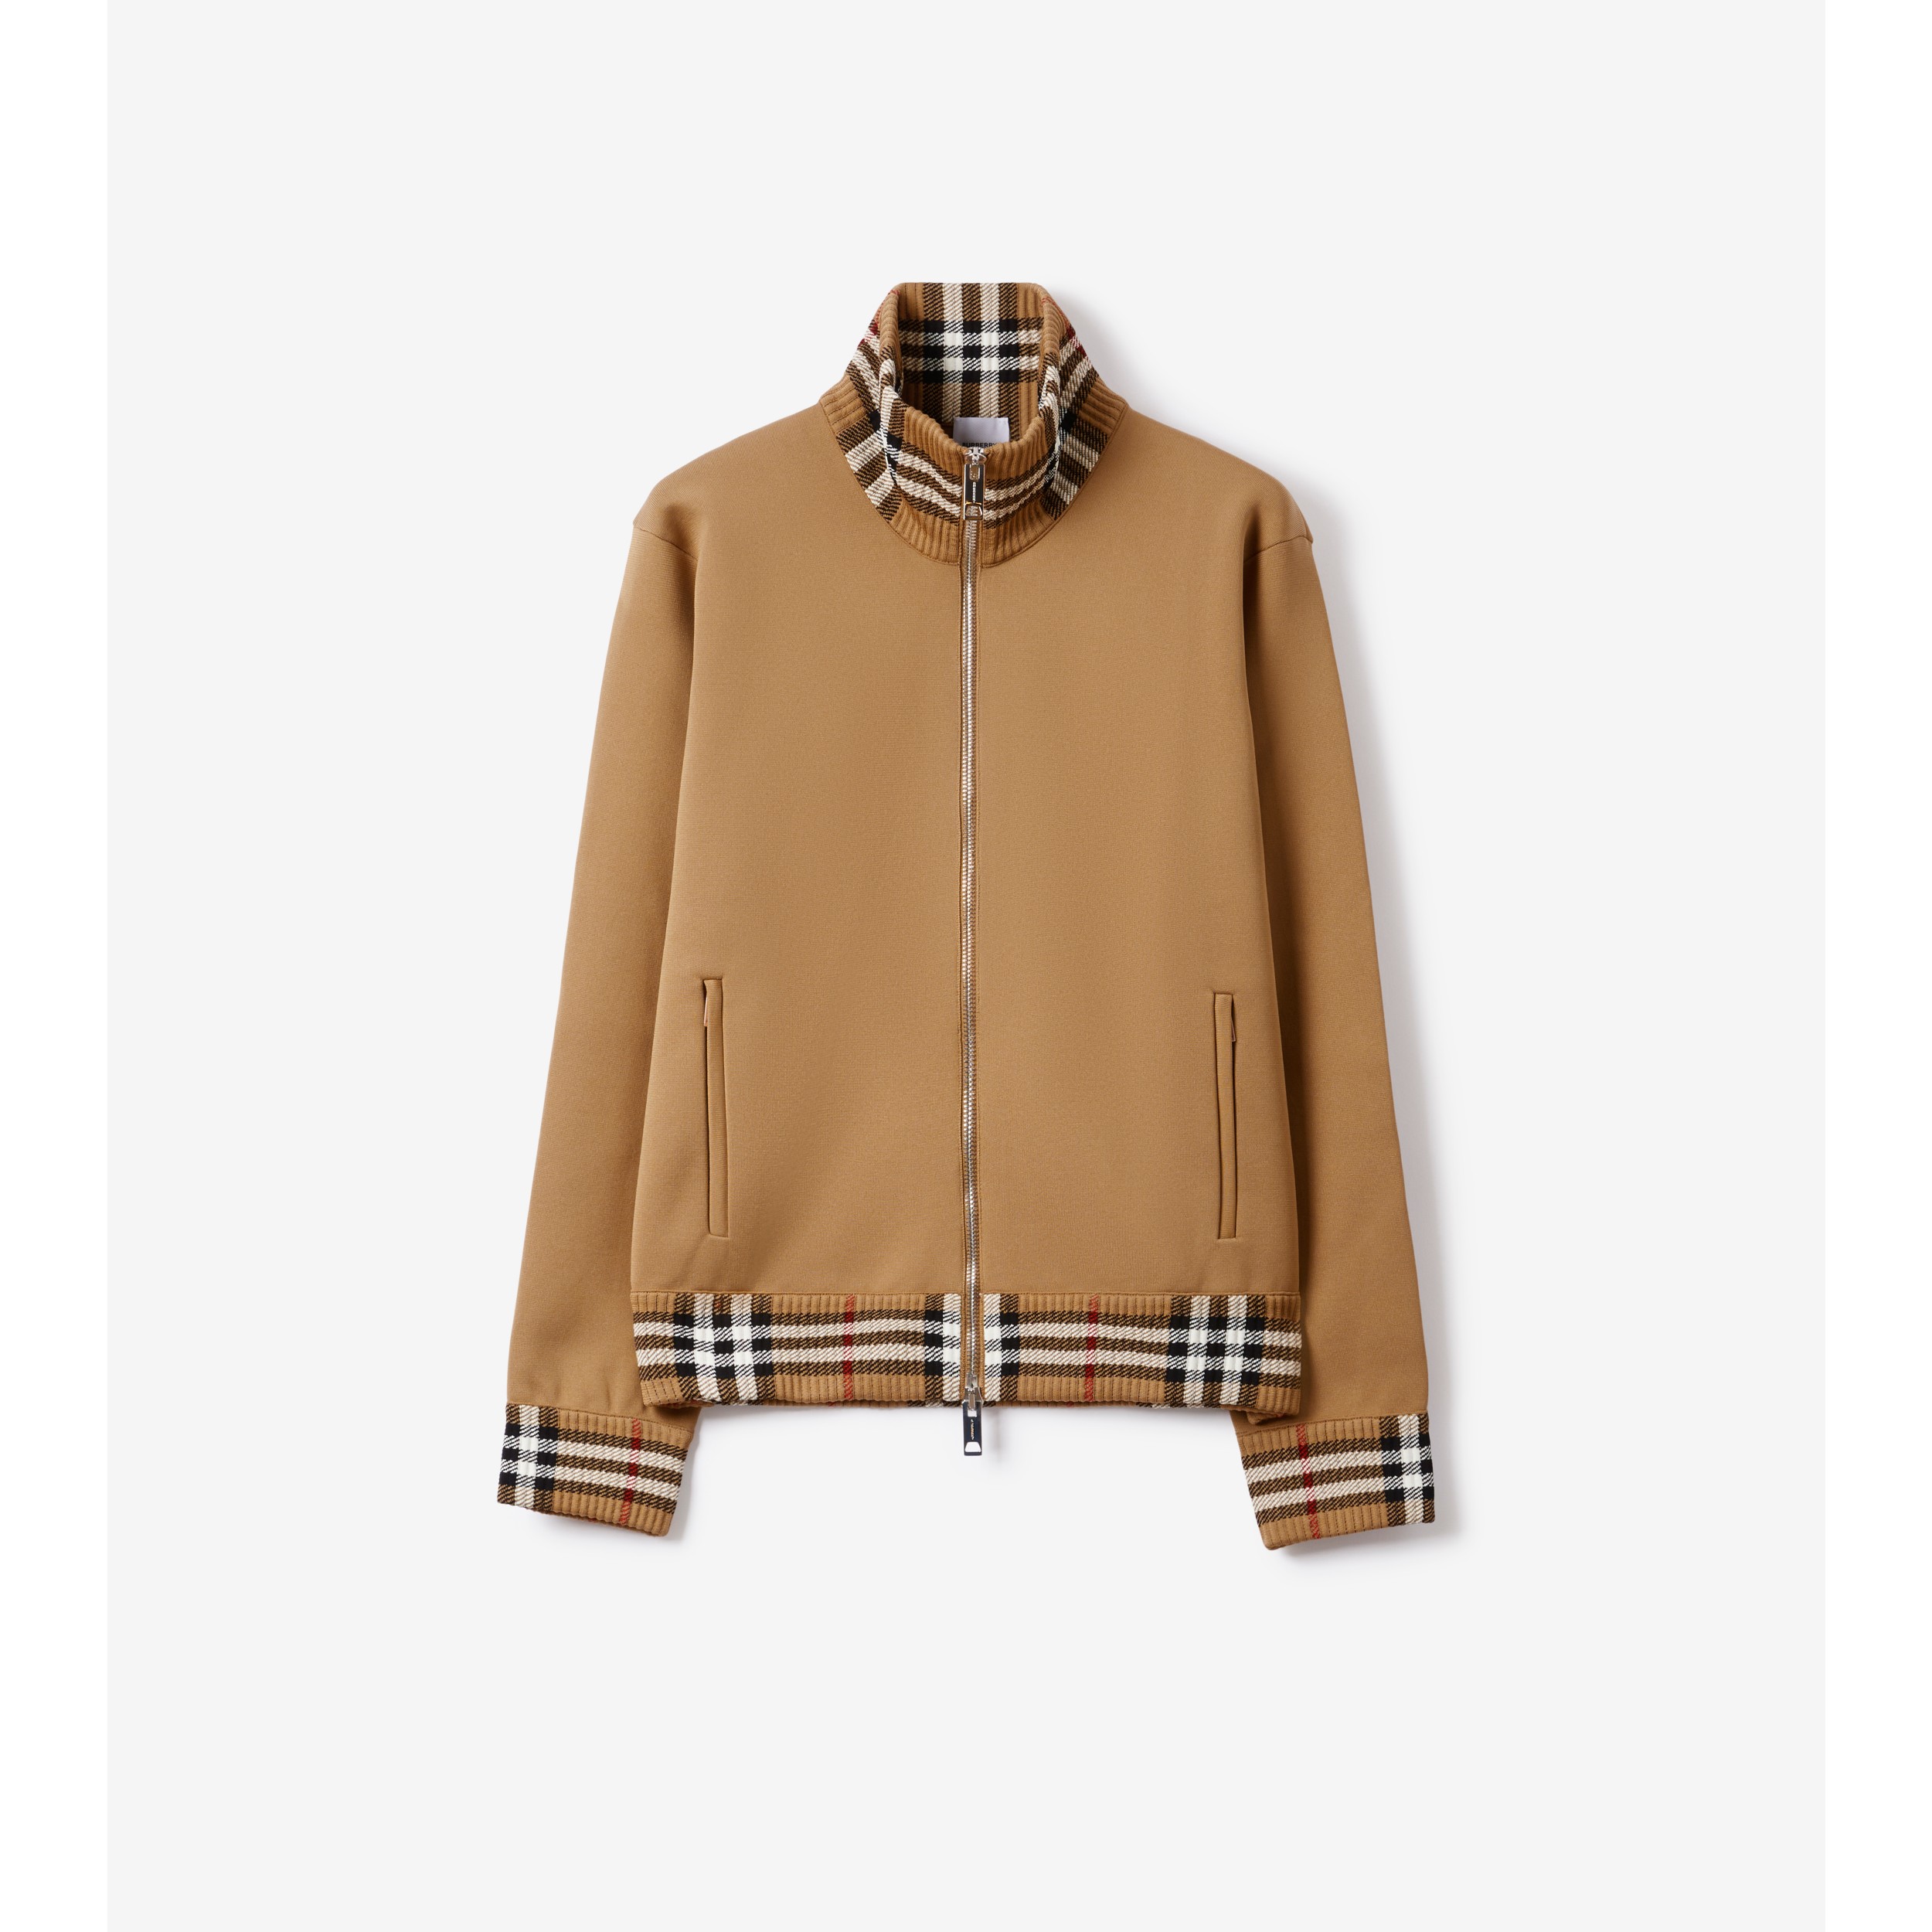 Burberry Check Wool Blend Shirt Jacket in Multicoloured - Burberry